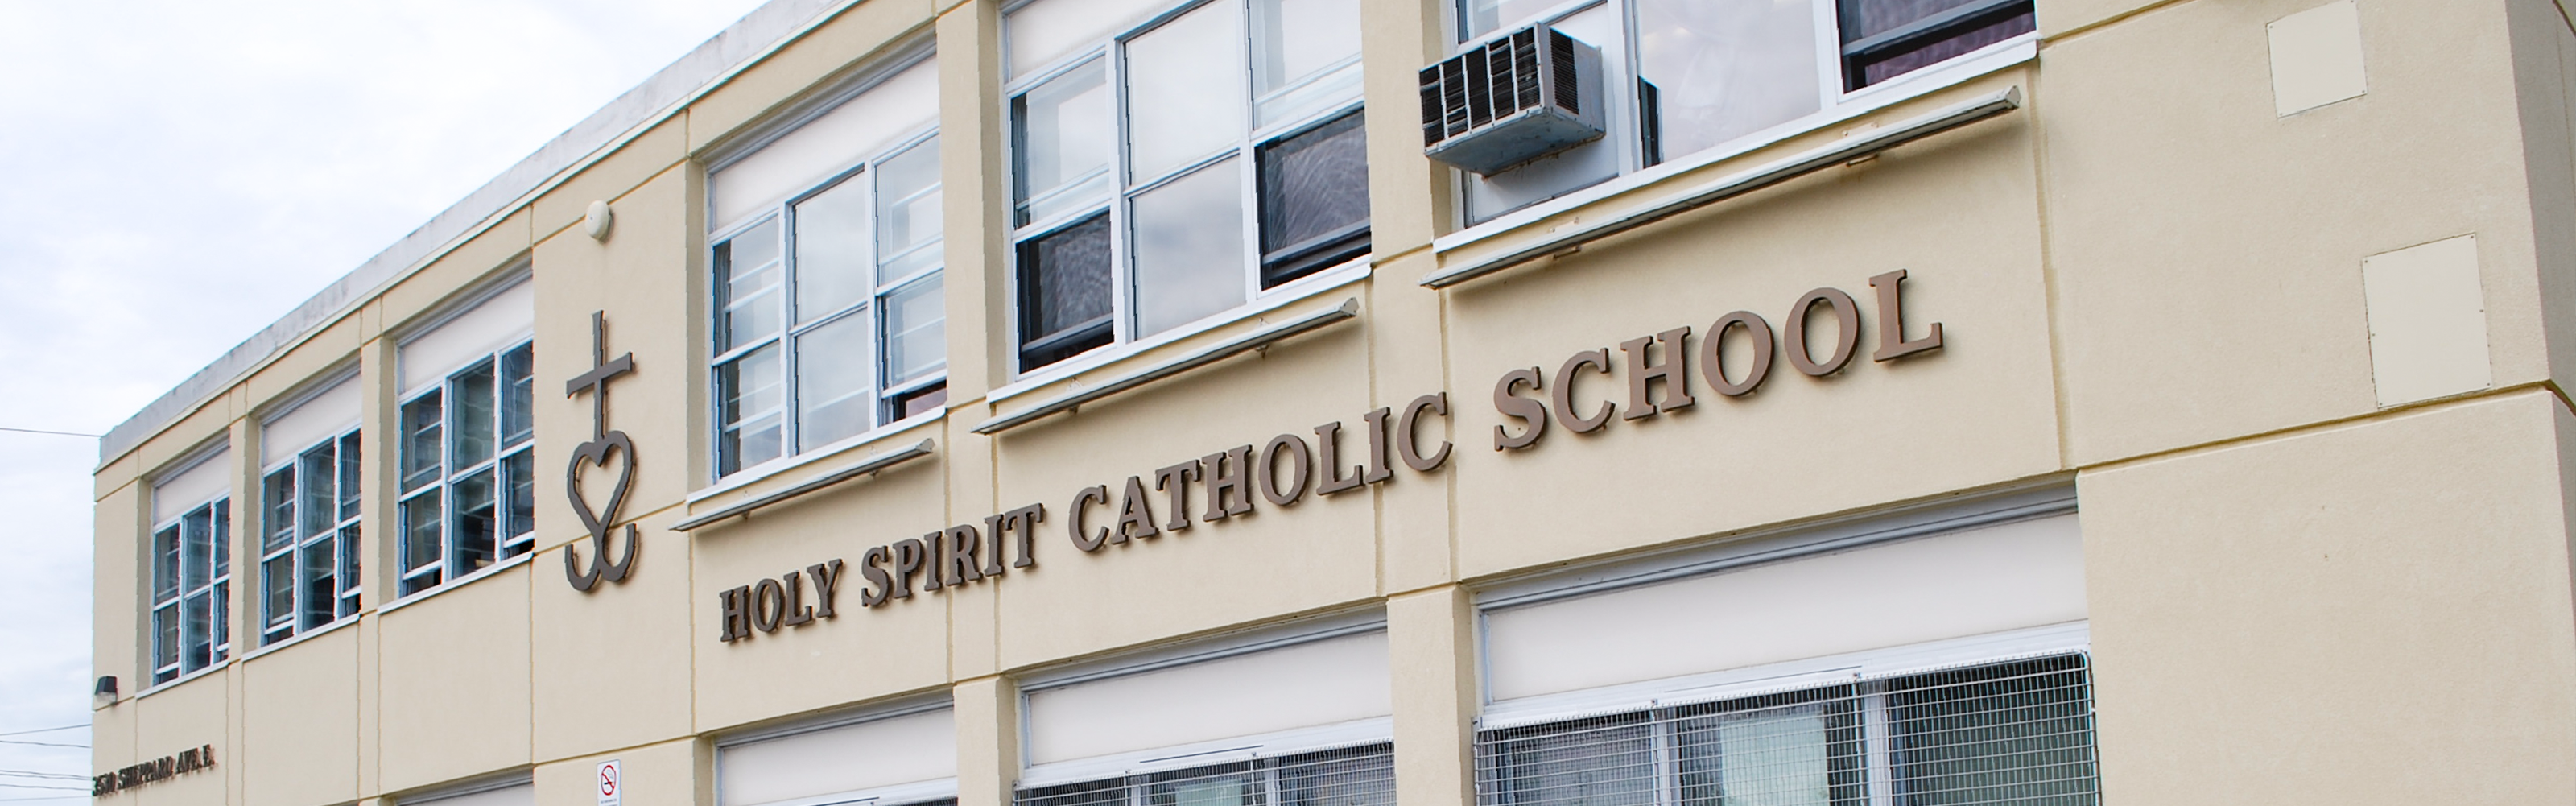 Front of the Holy Spirit Catholic School building